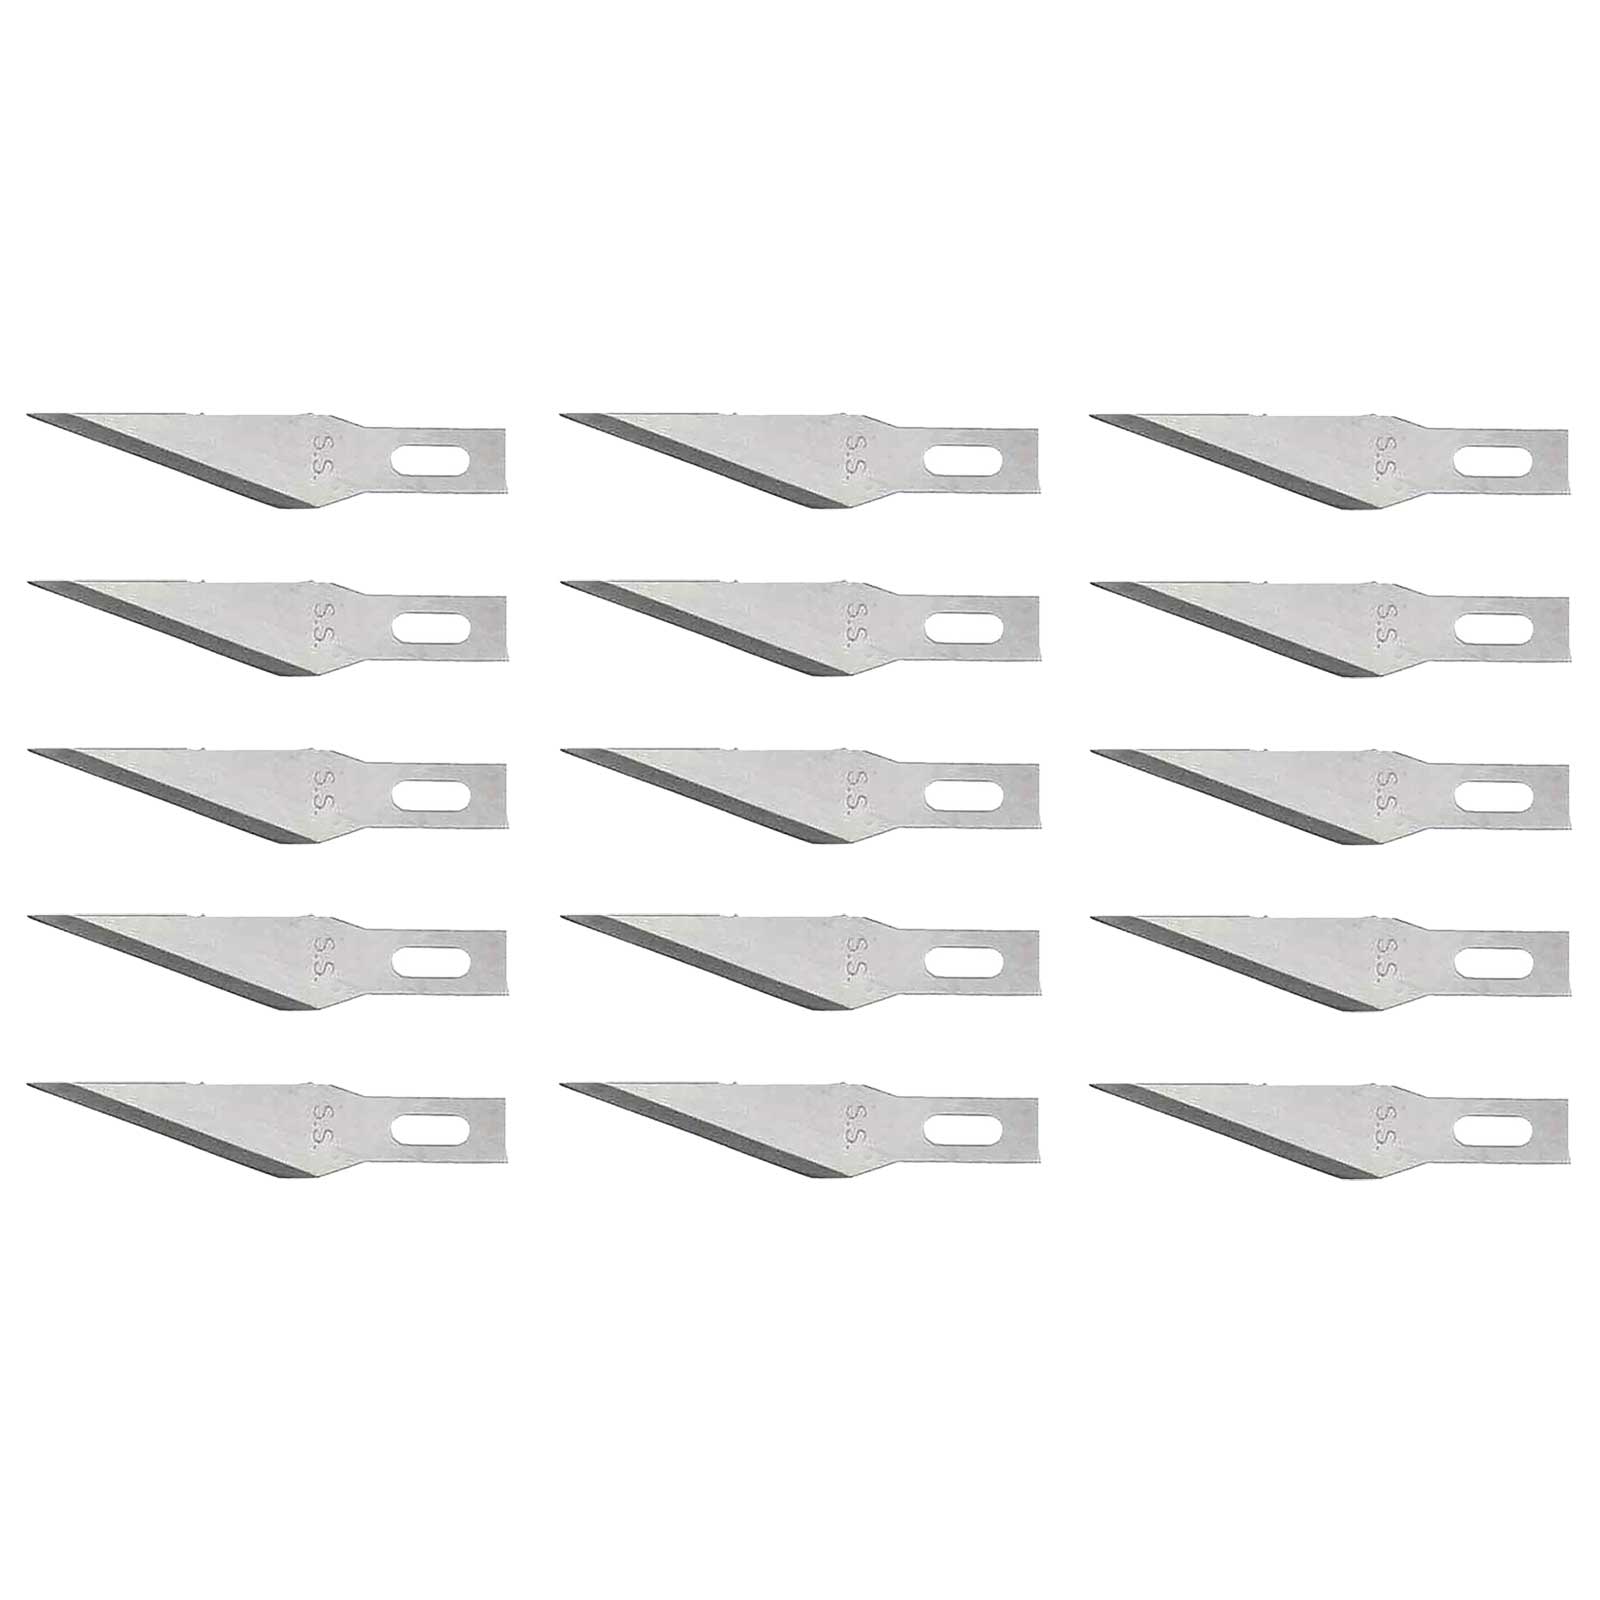 Excel 23021 #21 (11SS) Stainless Knife Blades - USA - 15pc